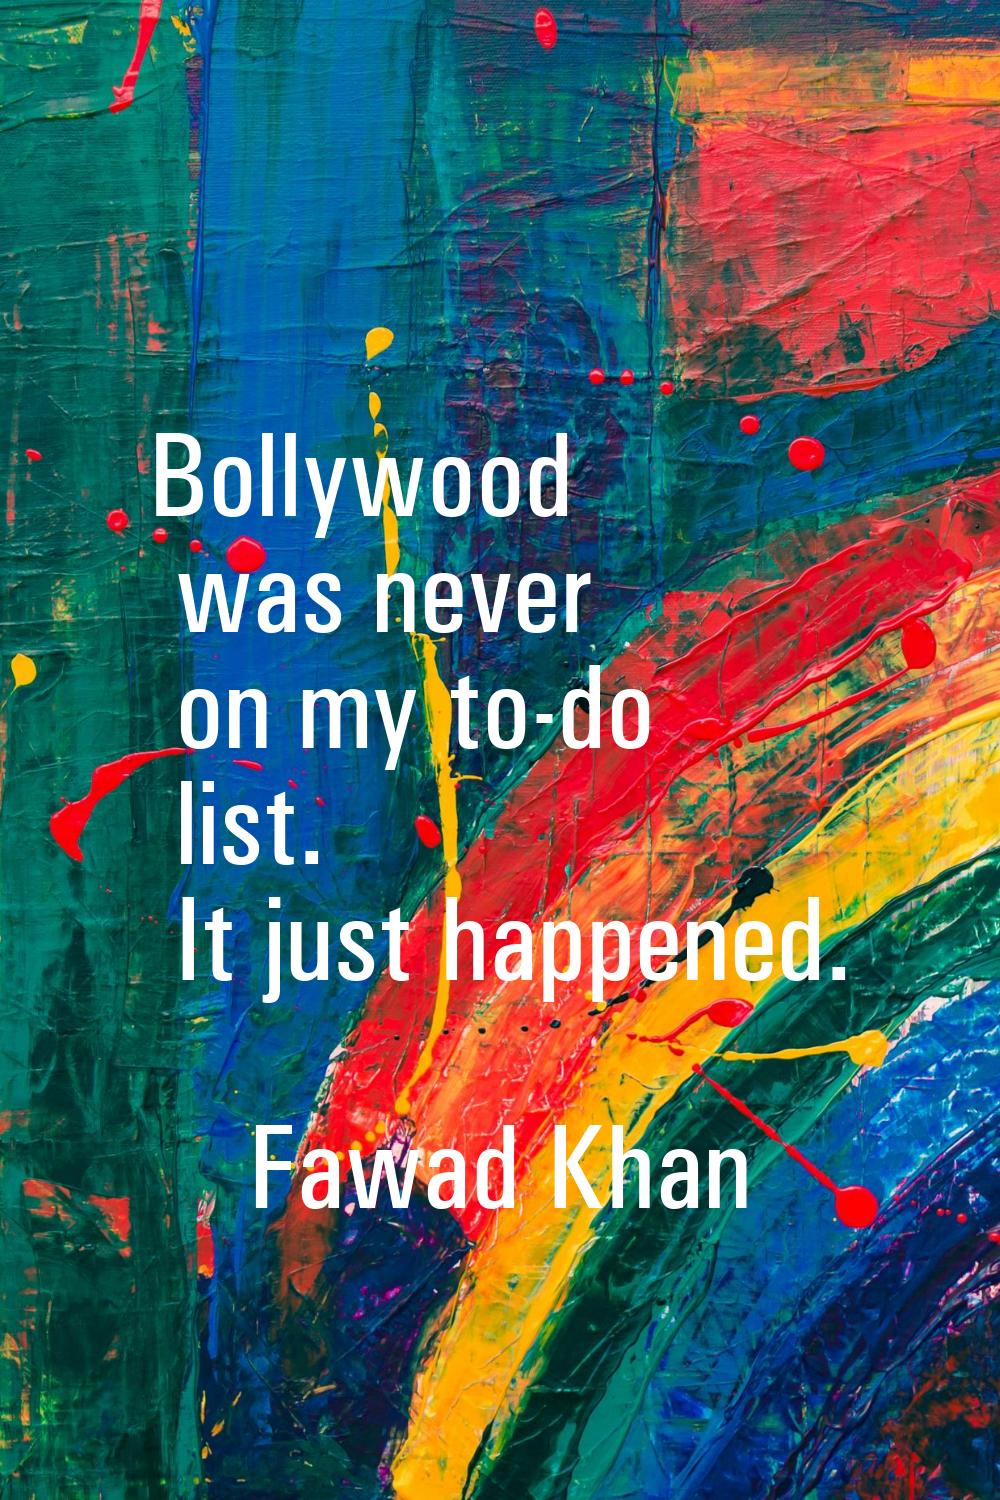 Bollywood was never on my to-do list. It just happened.